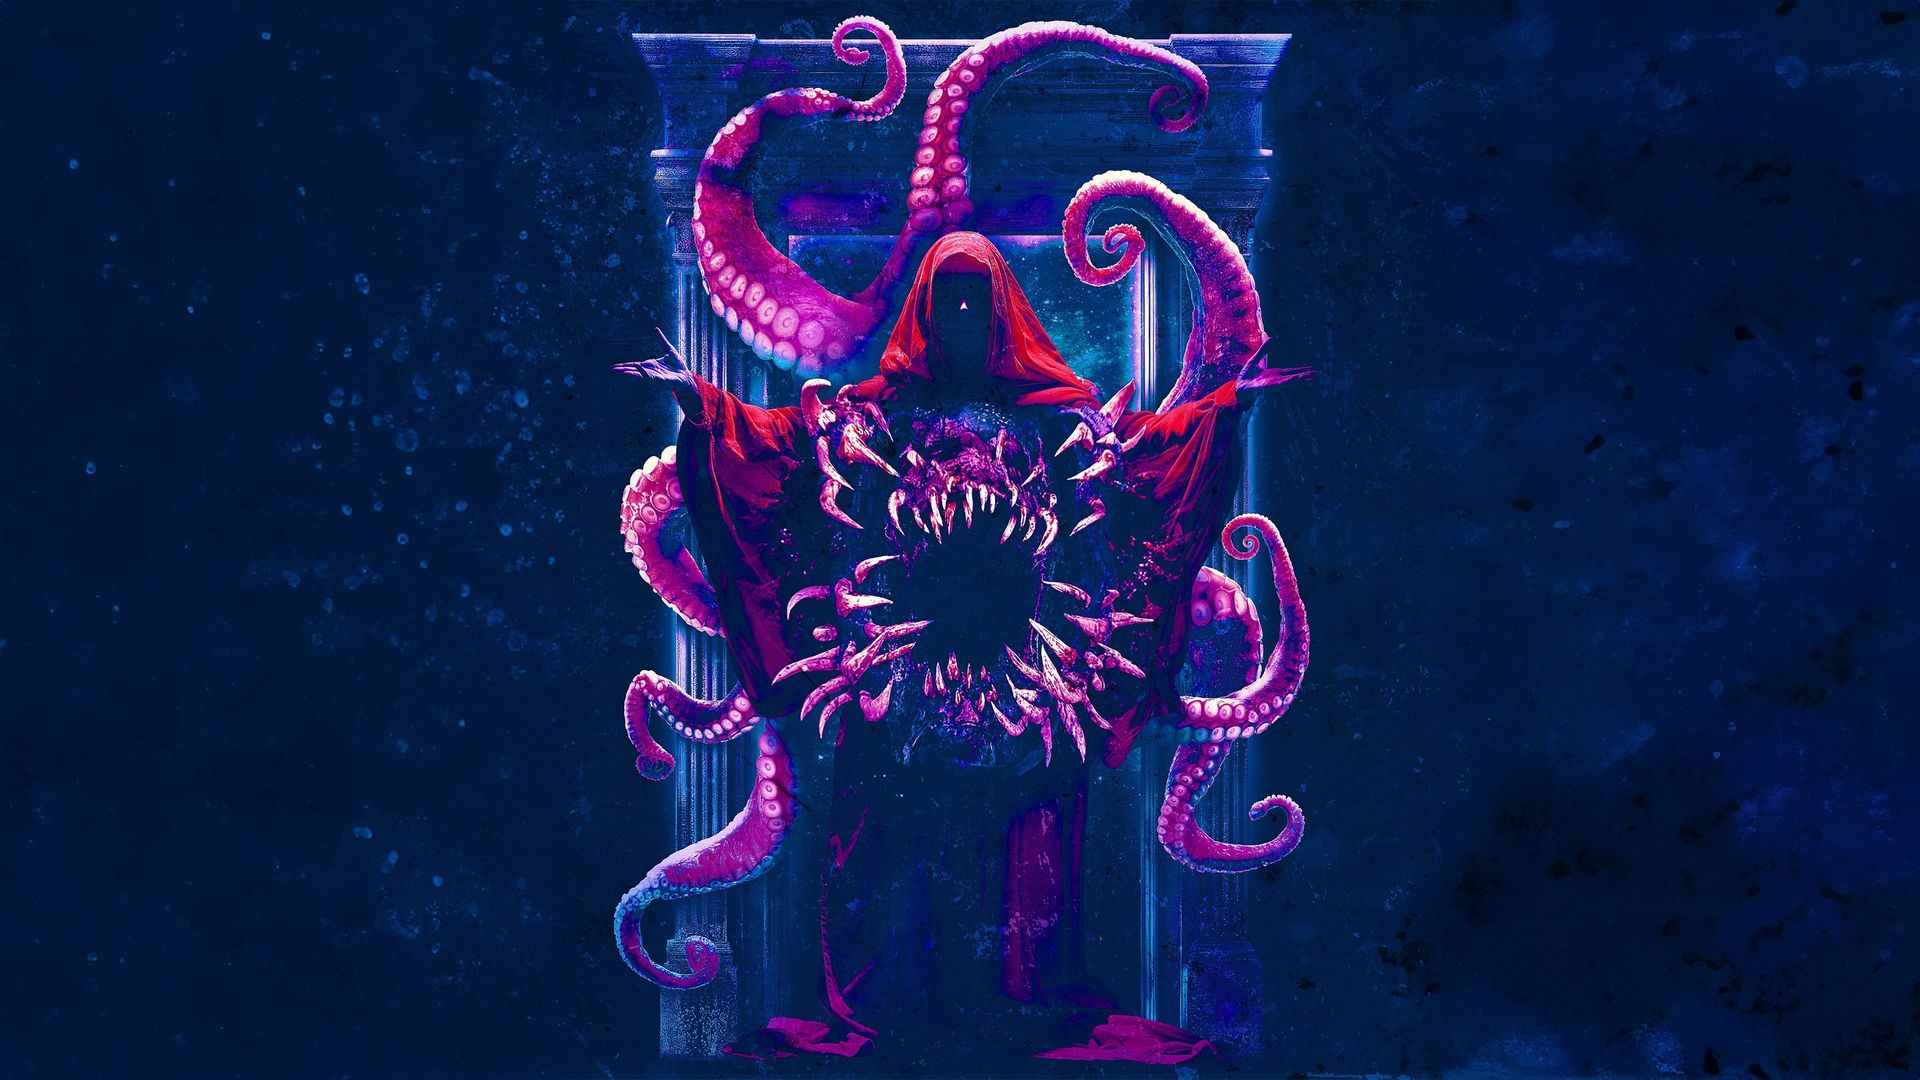 H. P. Lovecraft's the Old Ones background